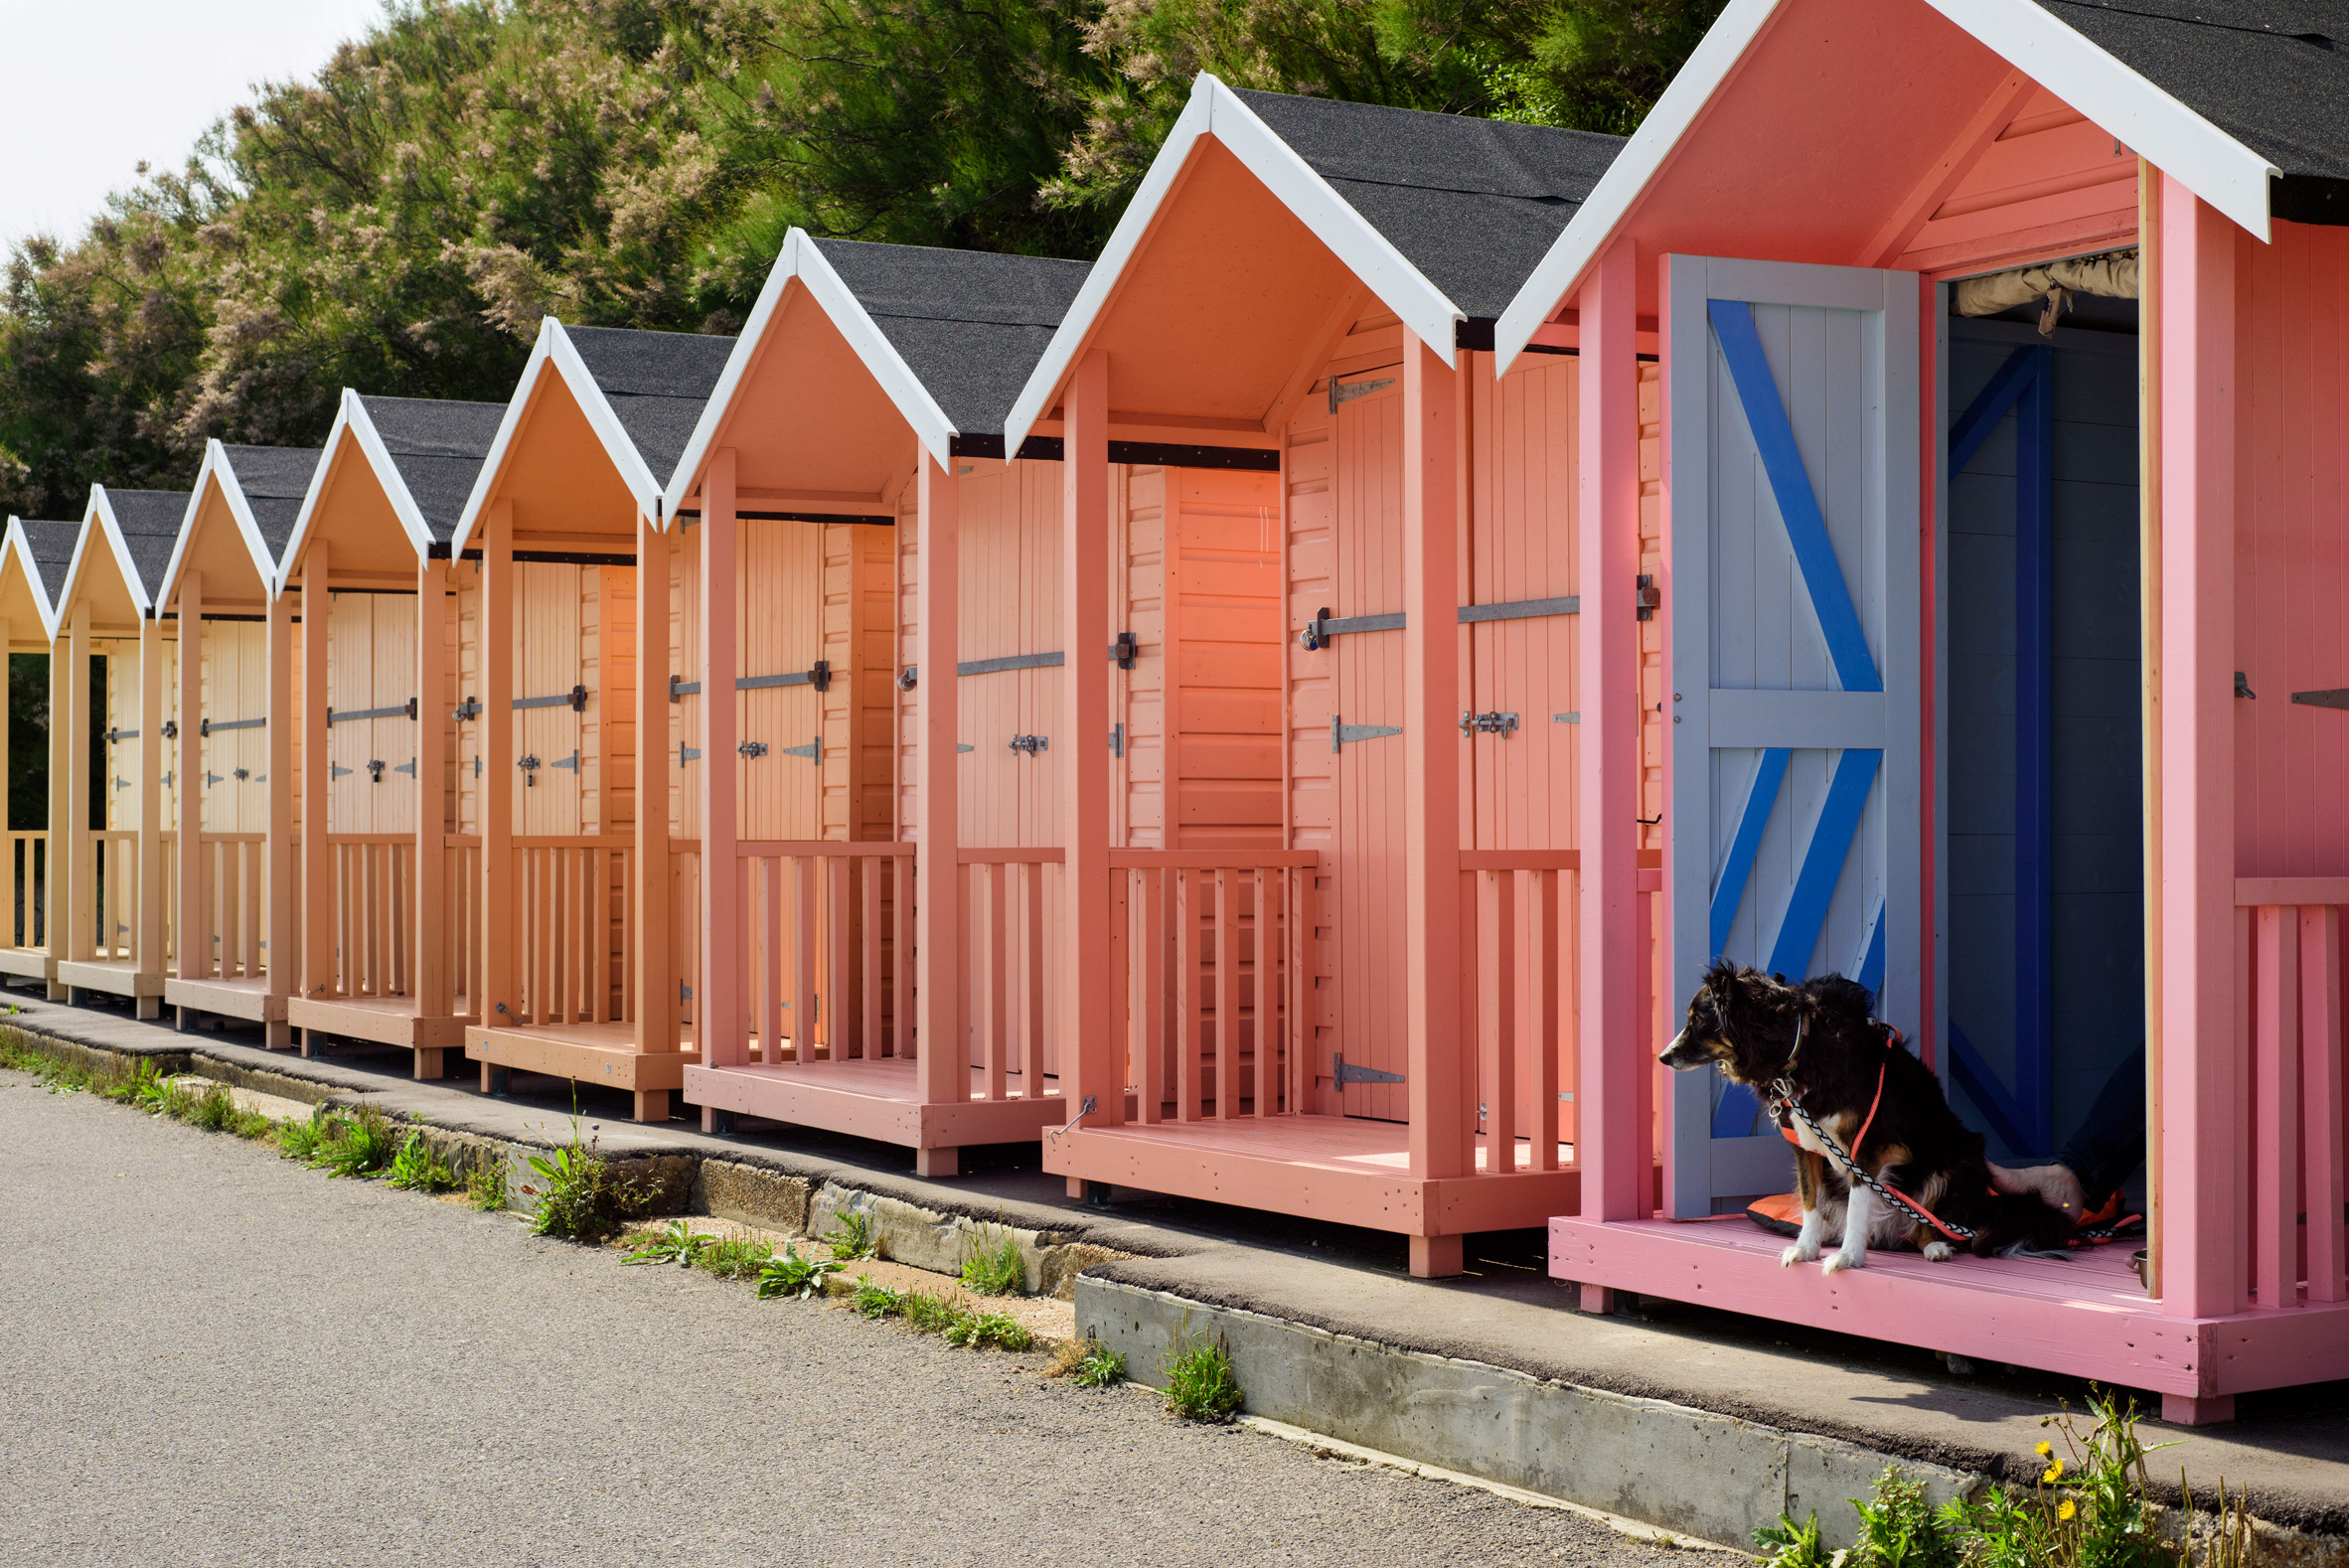 Beach huts in colourful yellow to pink gradient by Rana Begum